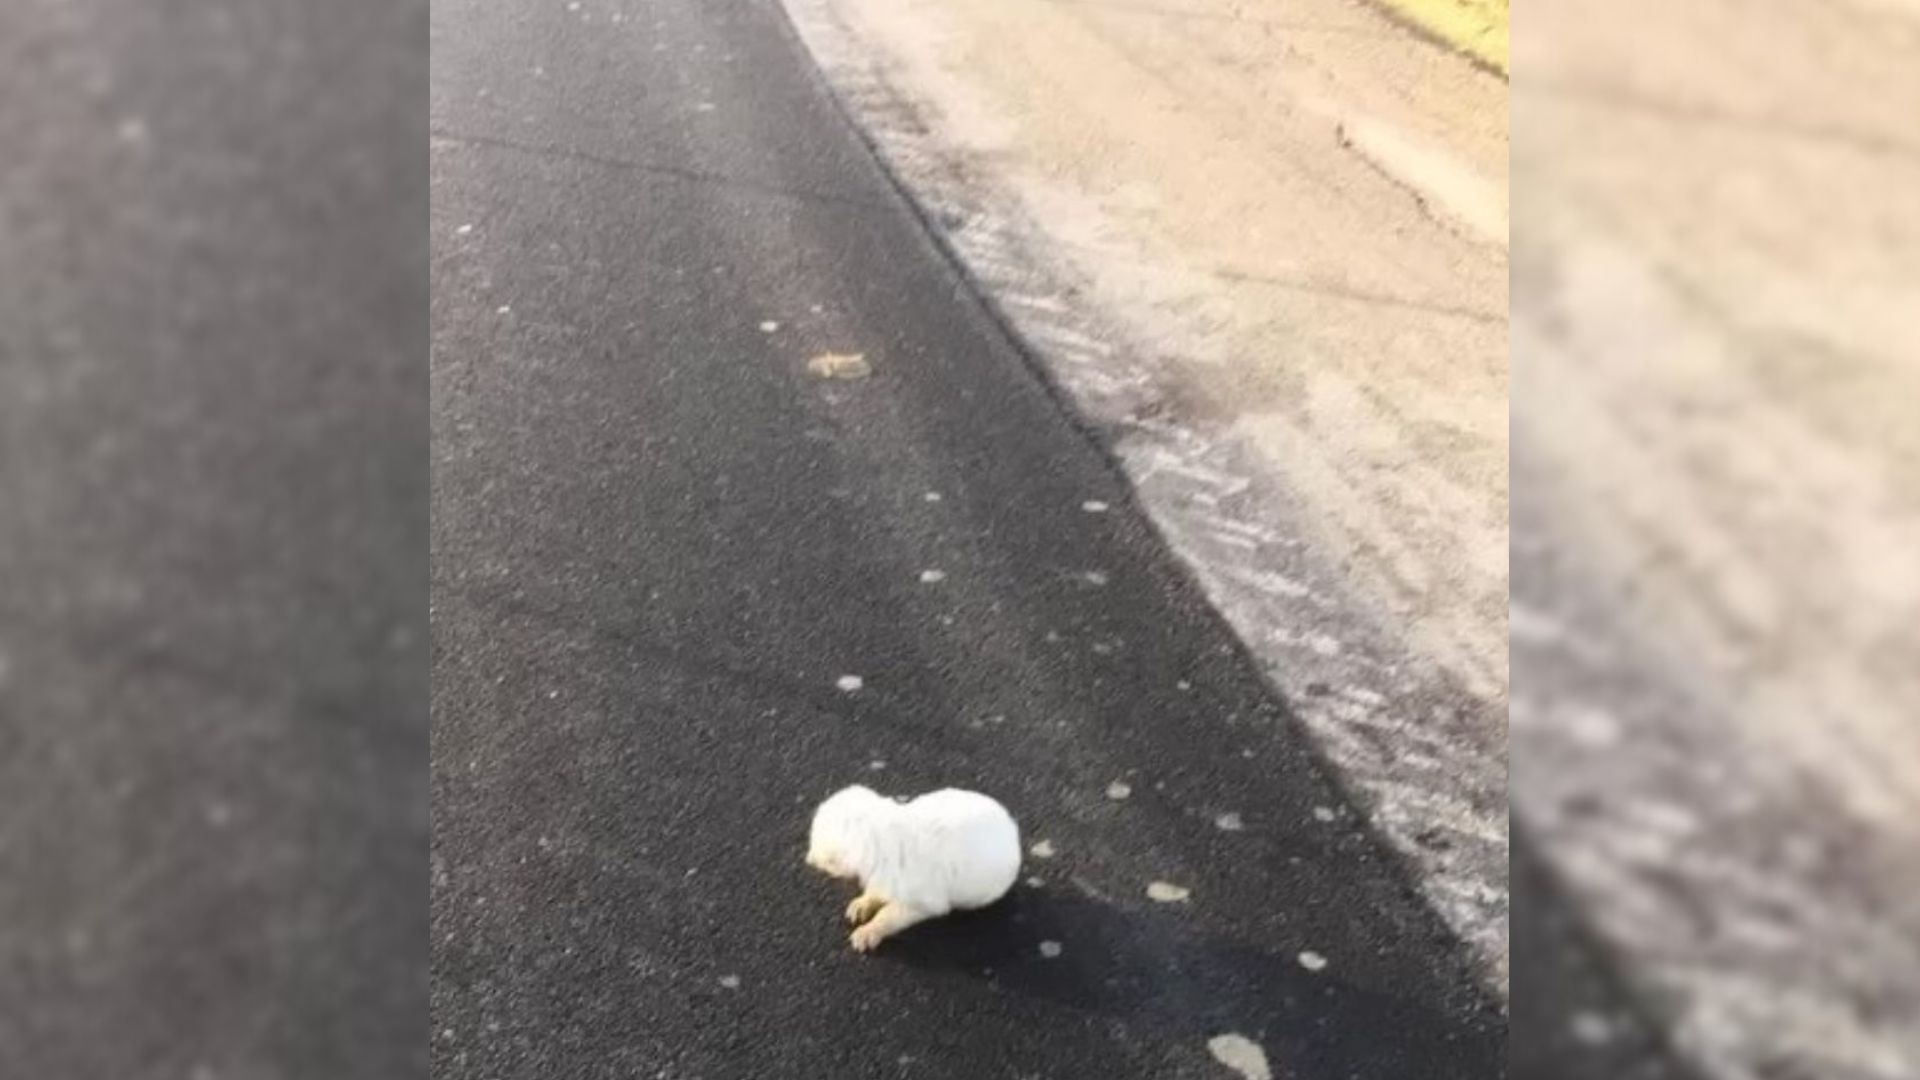 7-Day-Old Puppy Was Lying Helplessly On The Road Until She Noticed Him